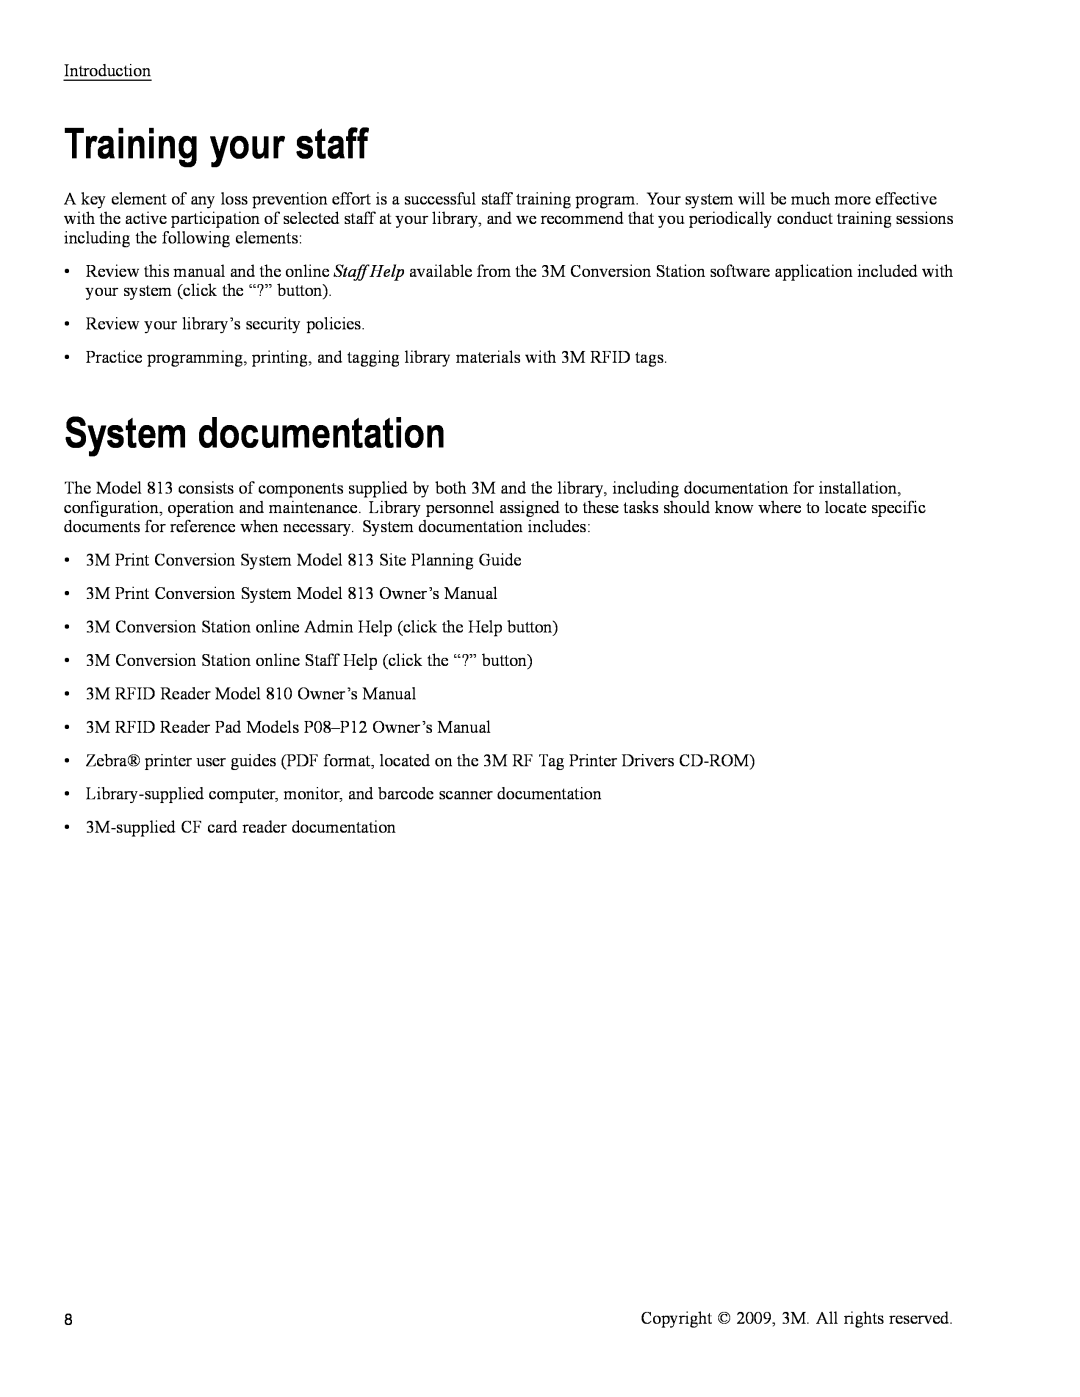 3M 813 owner manual Training your staff, System documentation 